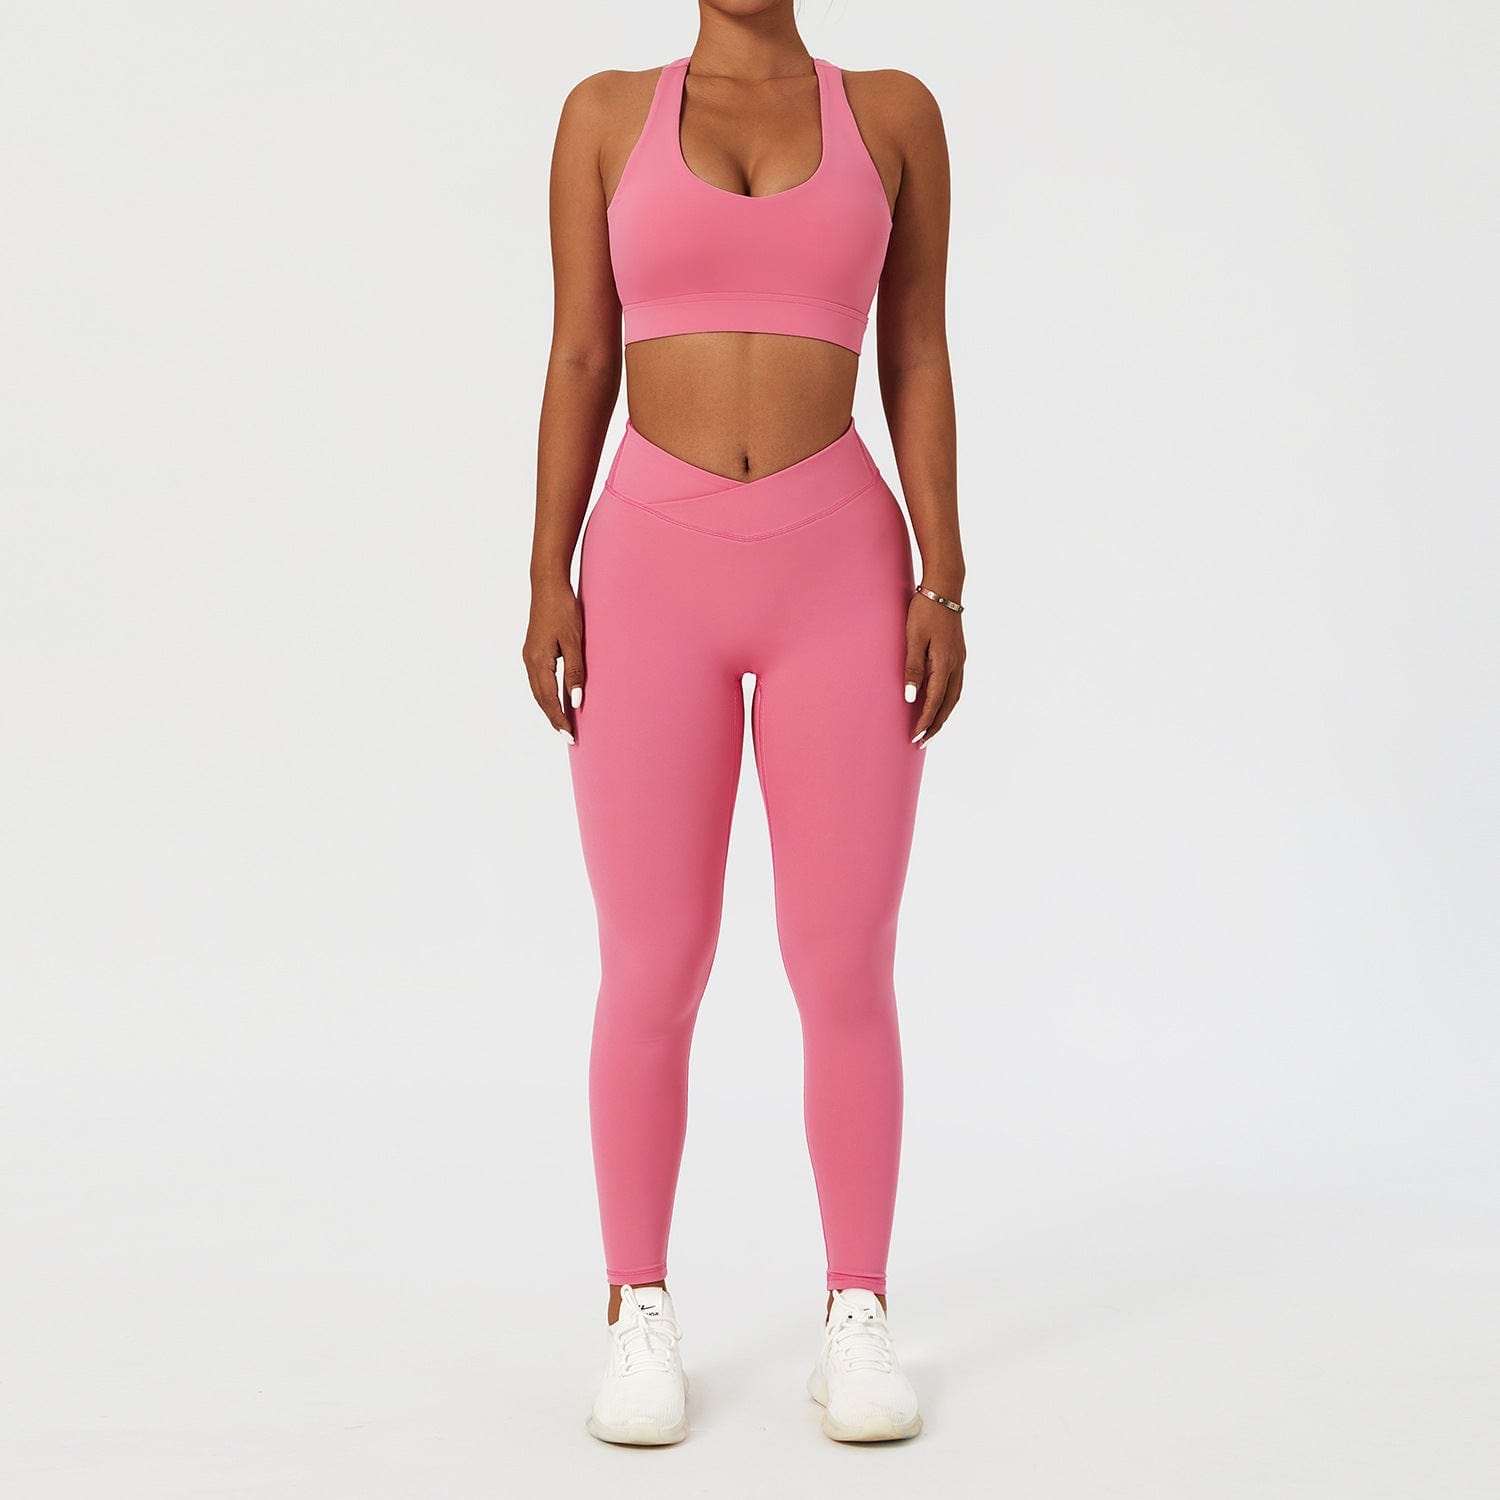 Women 2 Piece Quick Dry Jogging Training Wear Breathable Gym Fitness Sets Alpha C Apparel L / Pink style 2